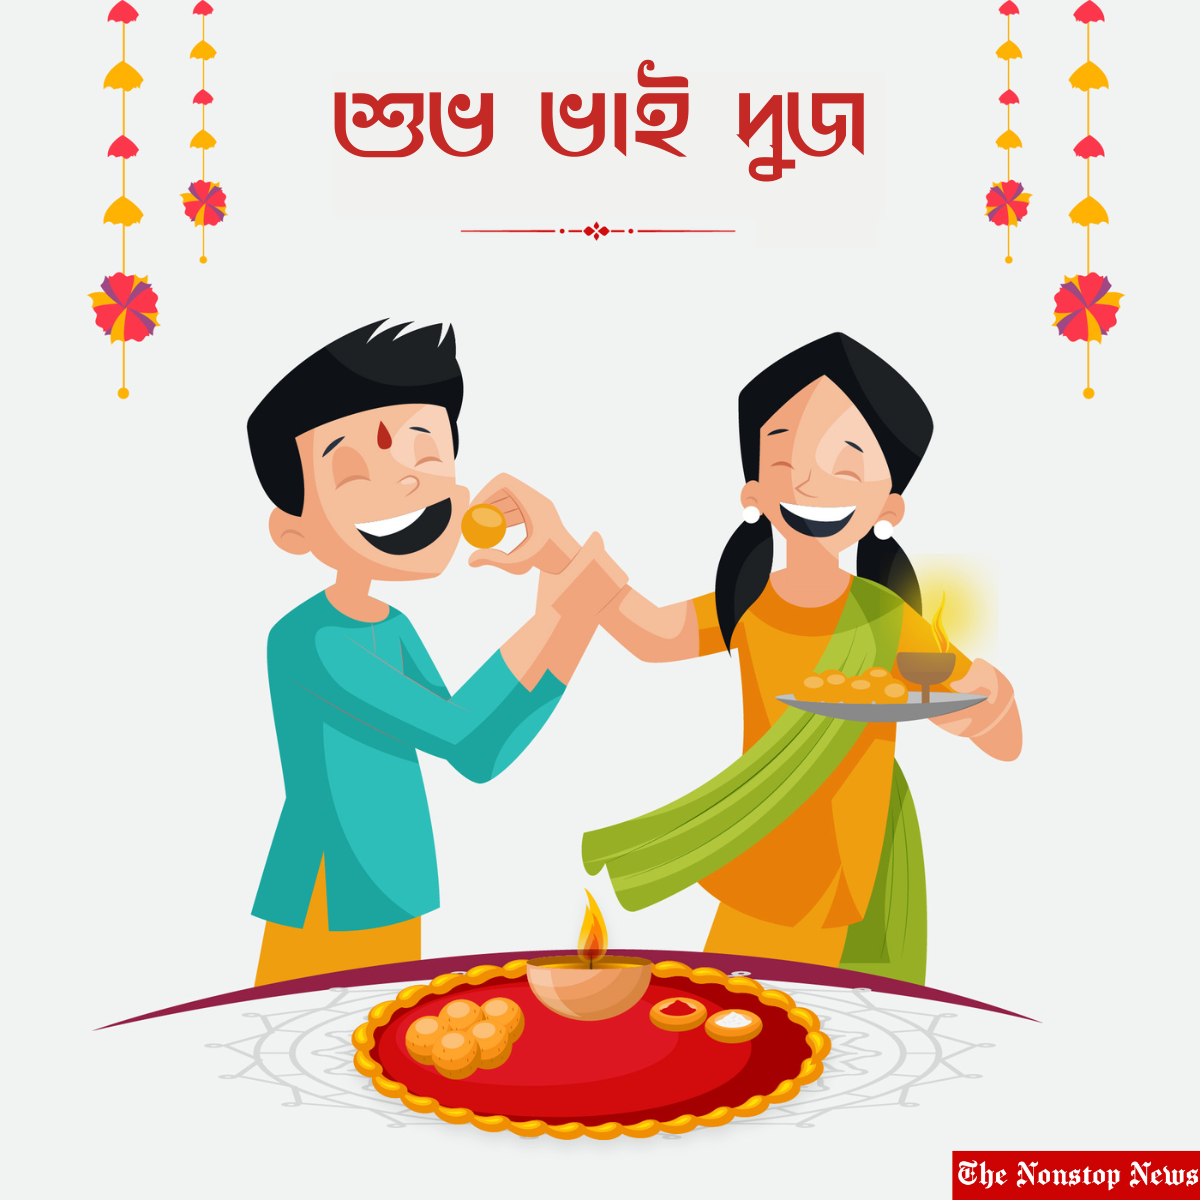 Happy Bhai Phonta Bengali Wishes 2022 Posters, Messges, HD Images, Status, Greetings, and Quotes